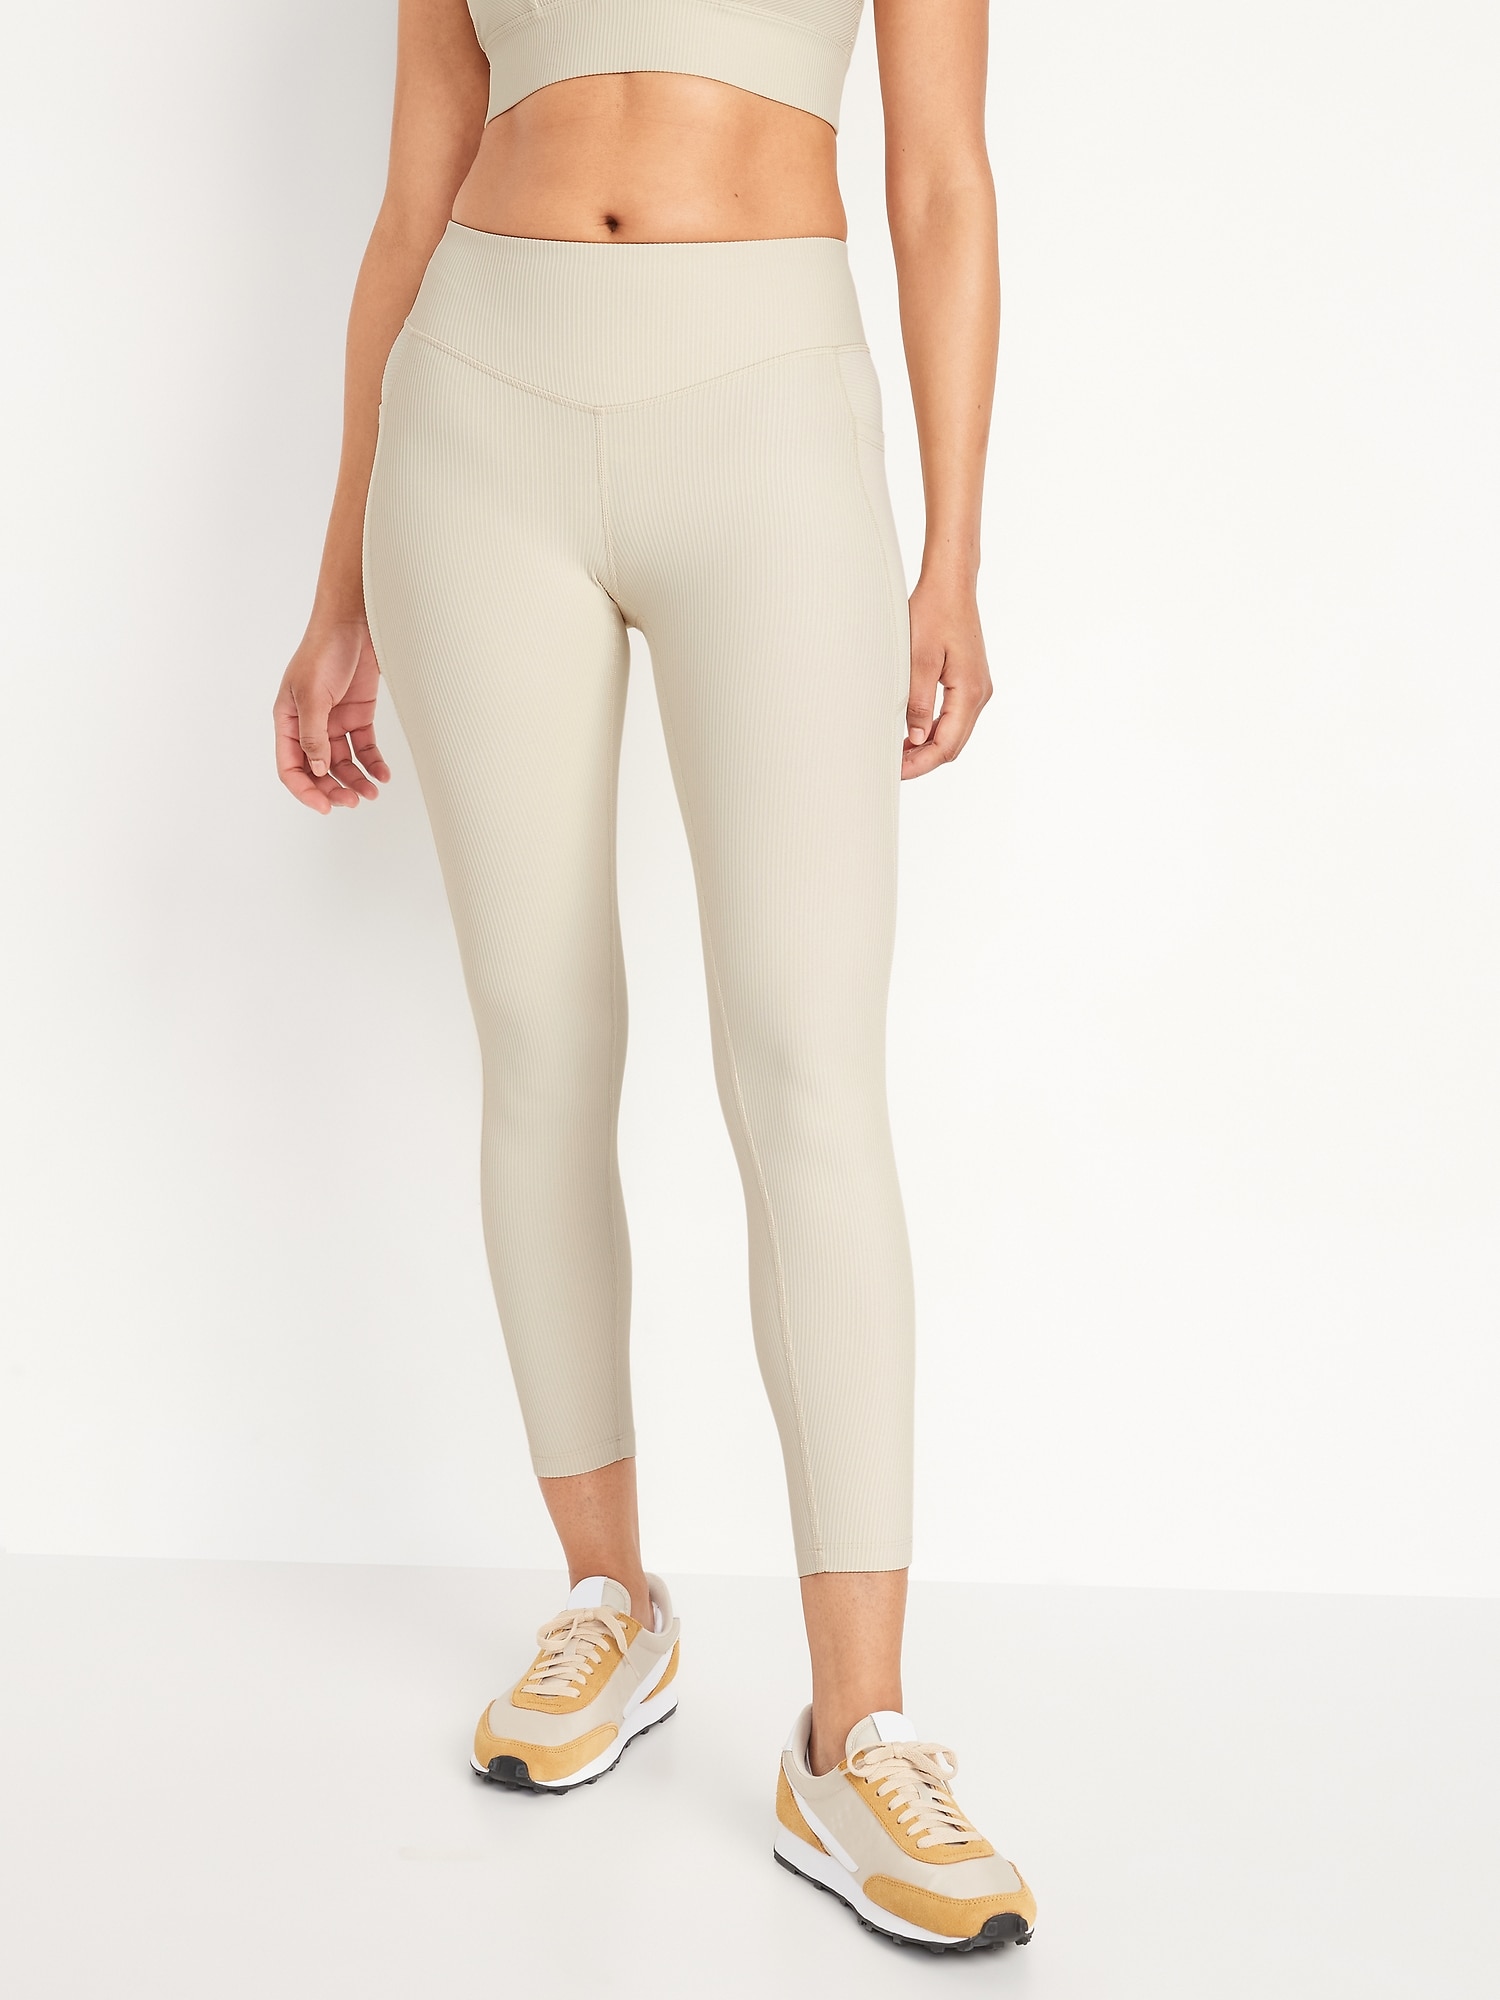 Old Navy High-Waisted PowerSoft Ribbed 7/8 Leggings for Women beige. 1